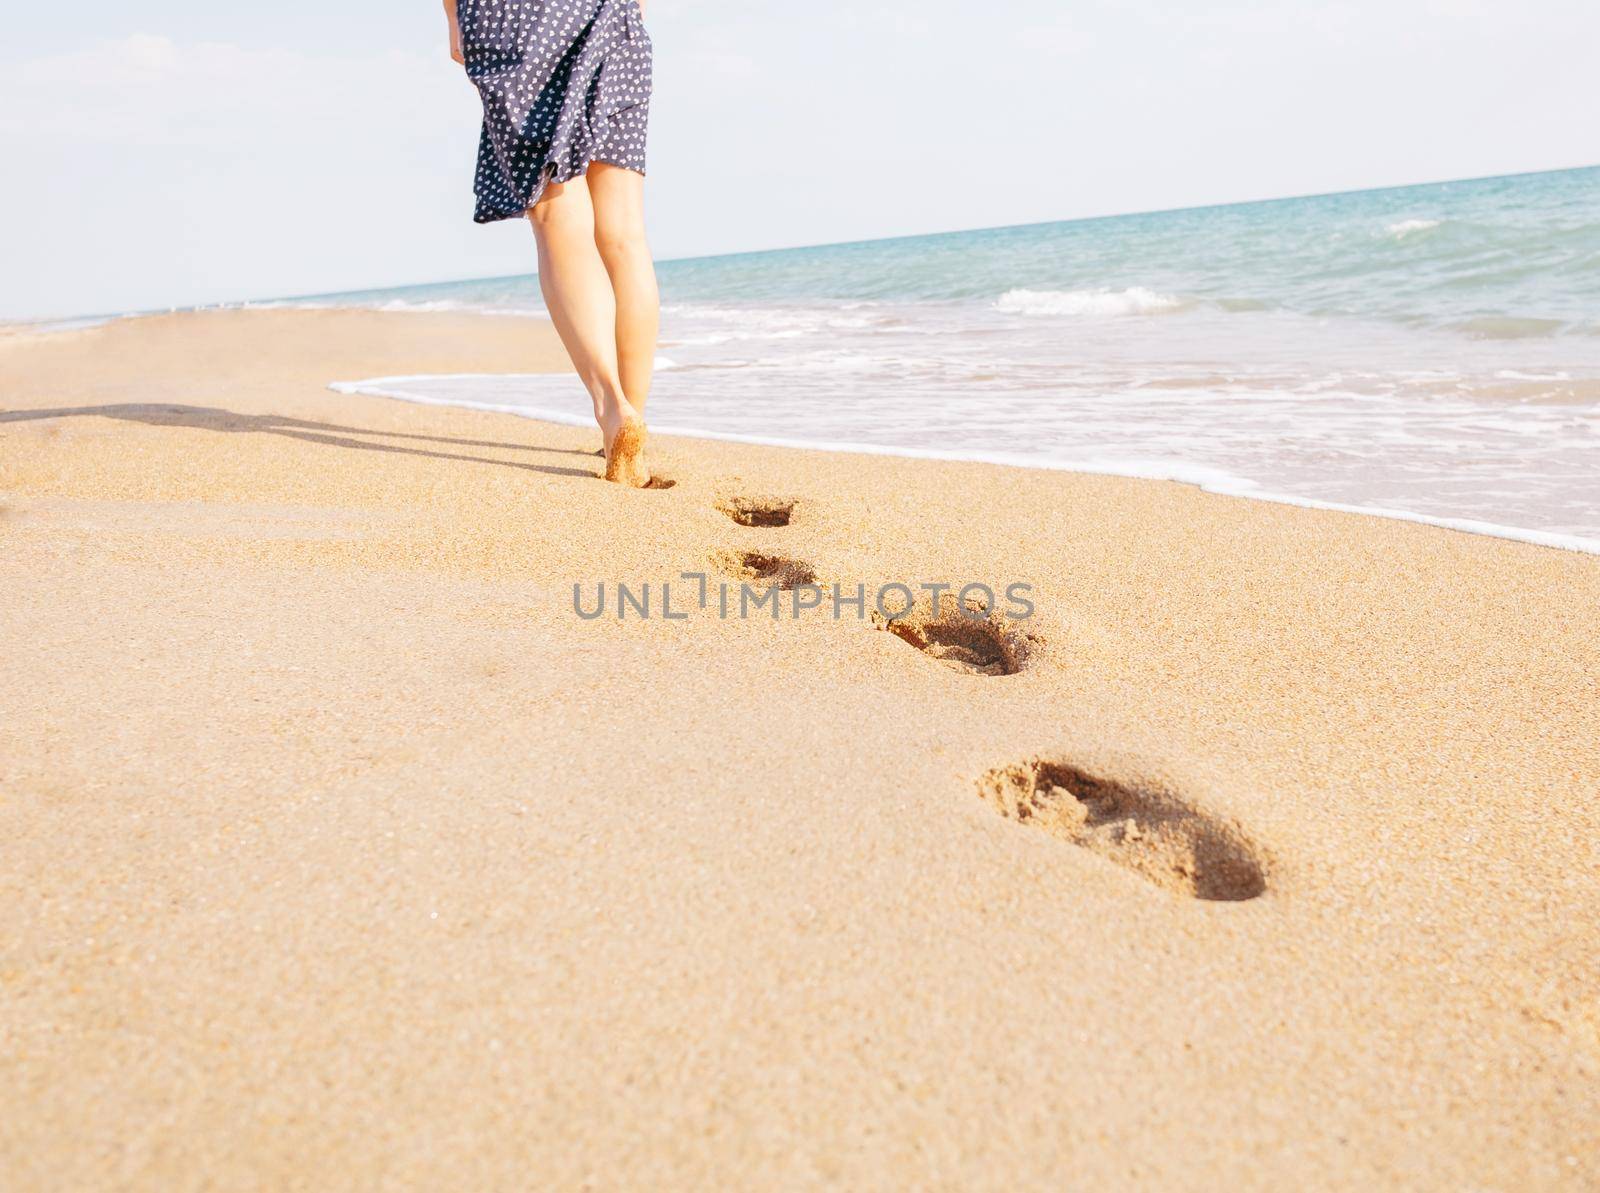 Barefoot young woman walking on beach leaving footprints in the sand near sea, view of legs. Concept of summer vacations.